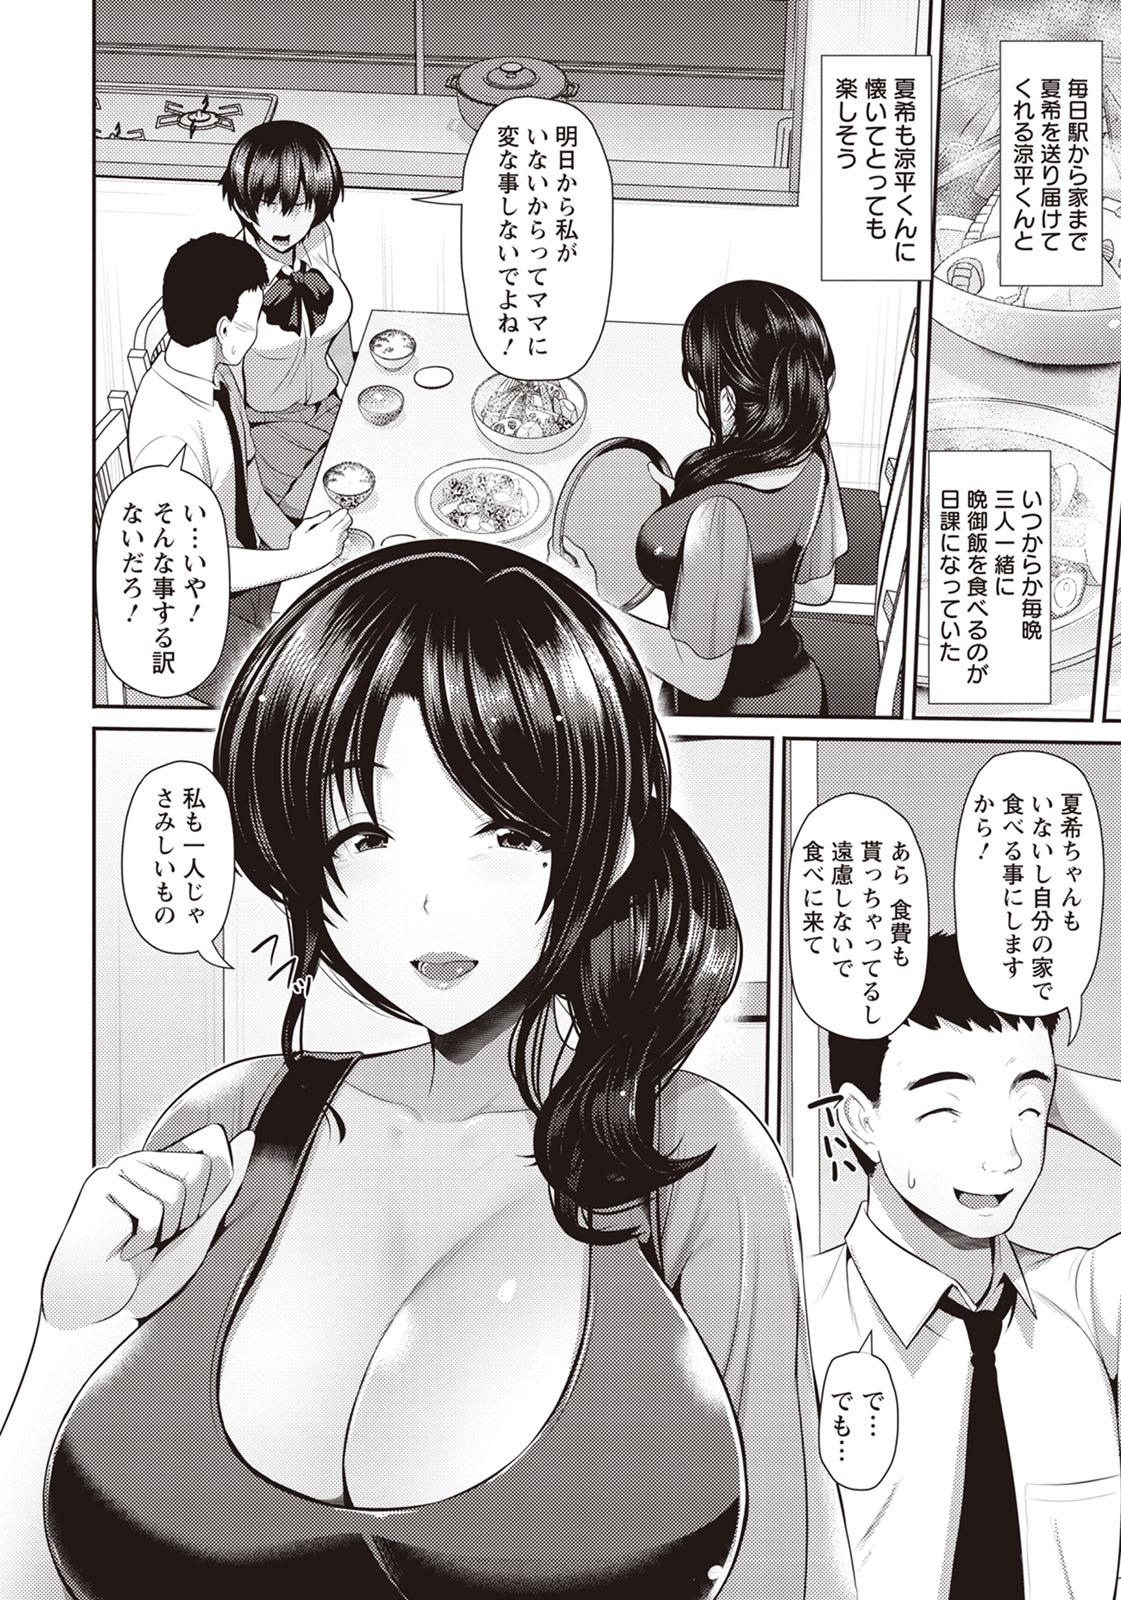 Trimmed Oyako to Seiai Class - Page 3